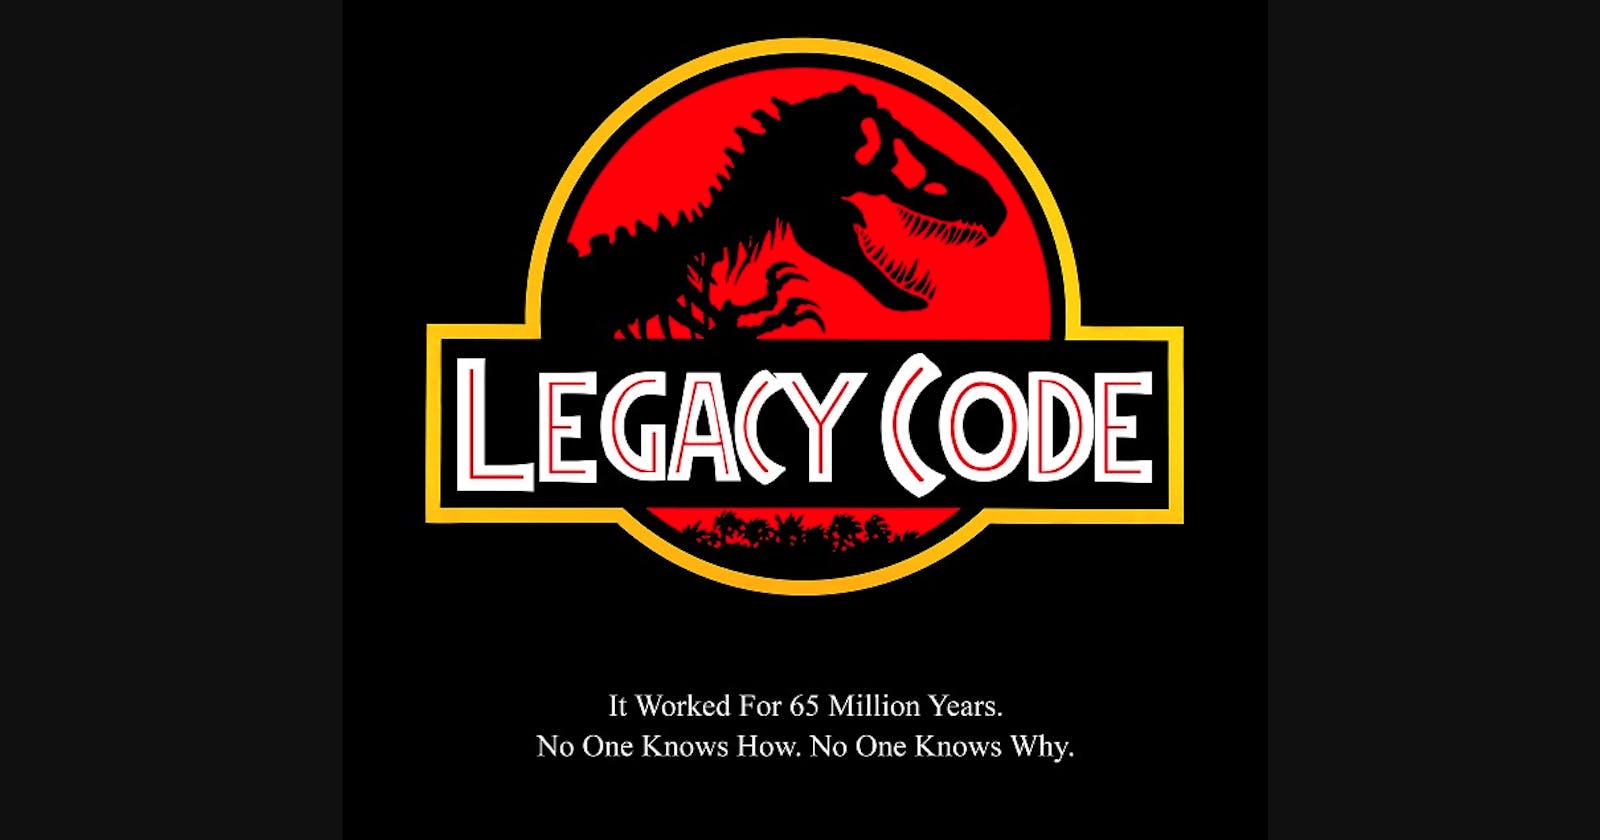 8 Things I've Learned Working in a Legacy Codebase